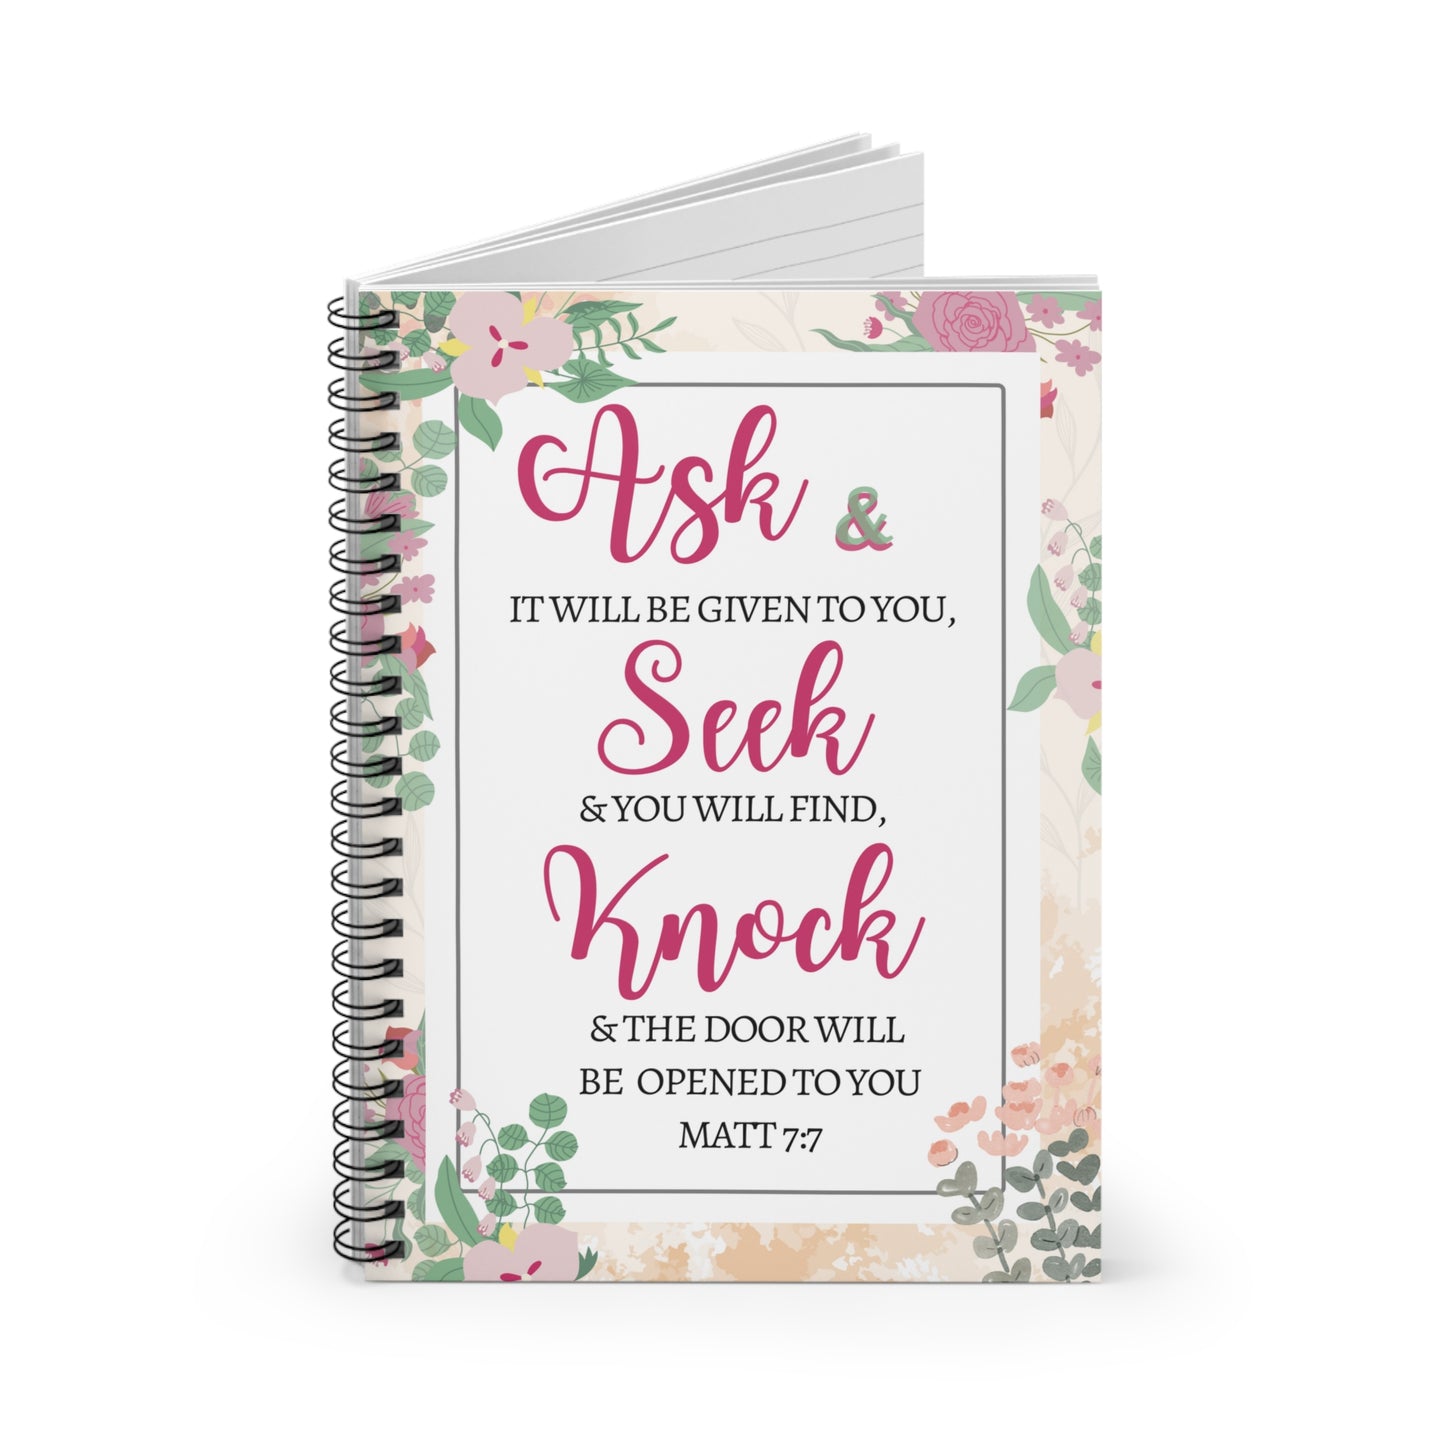 Ask, Seek, Knock Spiral Notebook Prayer Journal Gift- 118 page Ruled Line